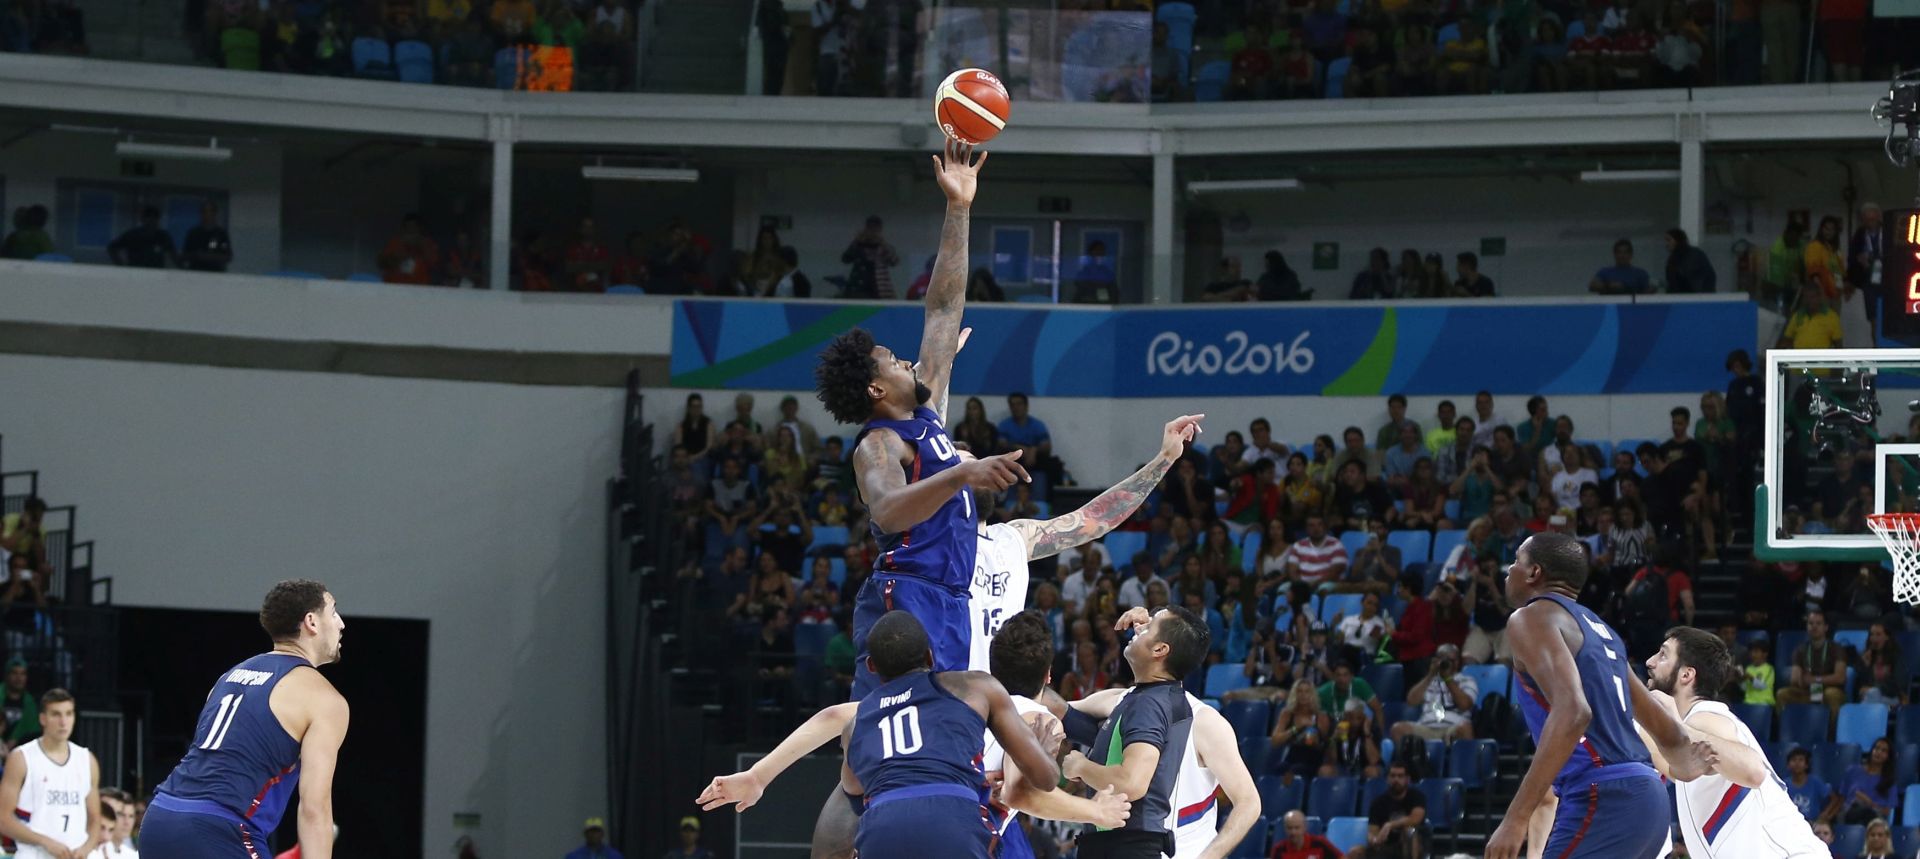 epa05505488 USA versus Serbia tip-off during the men's basketball gold medal game of the Rio 2016 Olympic Games at the Carioca Arena 1 in the Olympic Park in Rio de Janeiro, Brazil, 21 August 2016.  EPA/LARRY W. SMITH